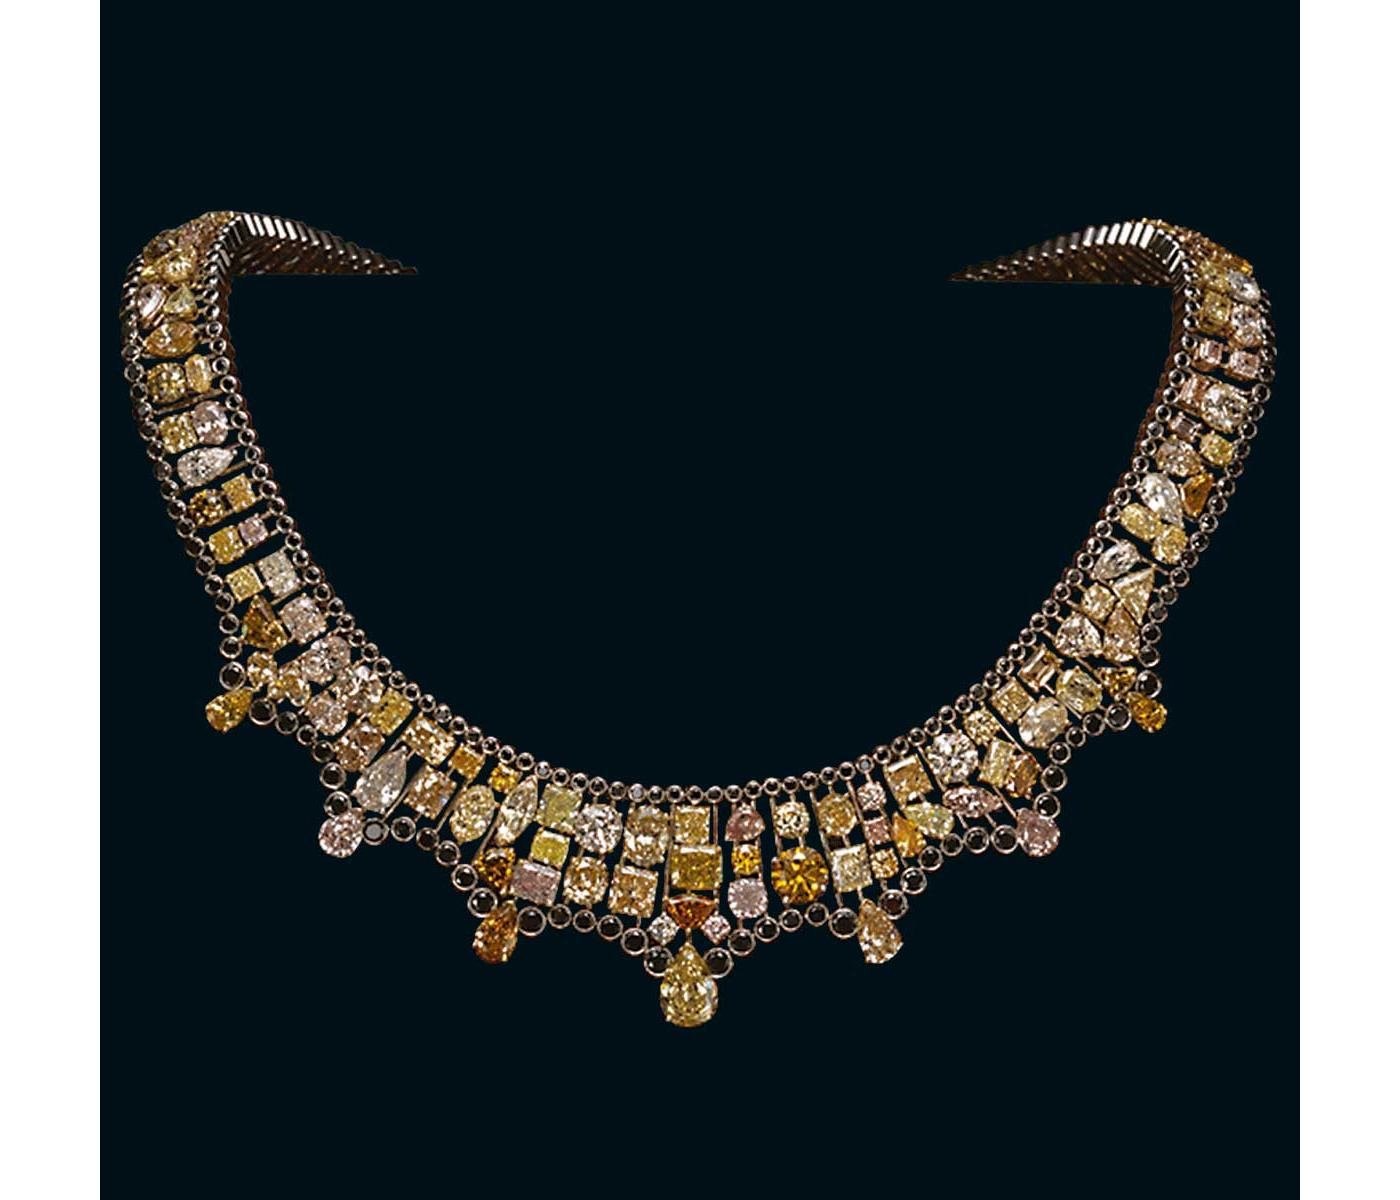 Necklace by Amgad Seasons